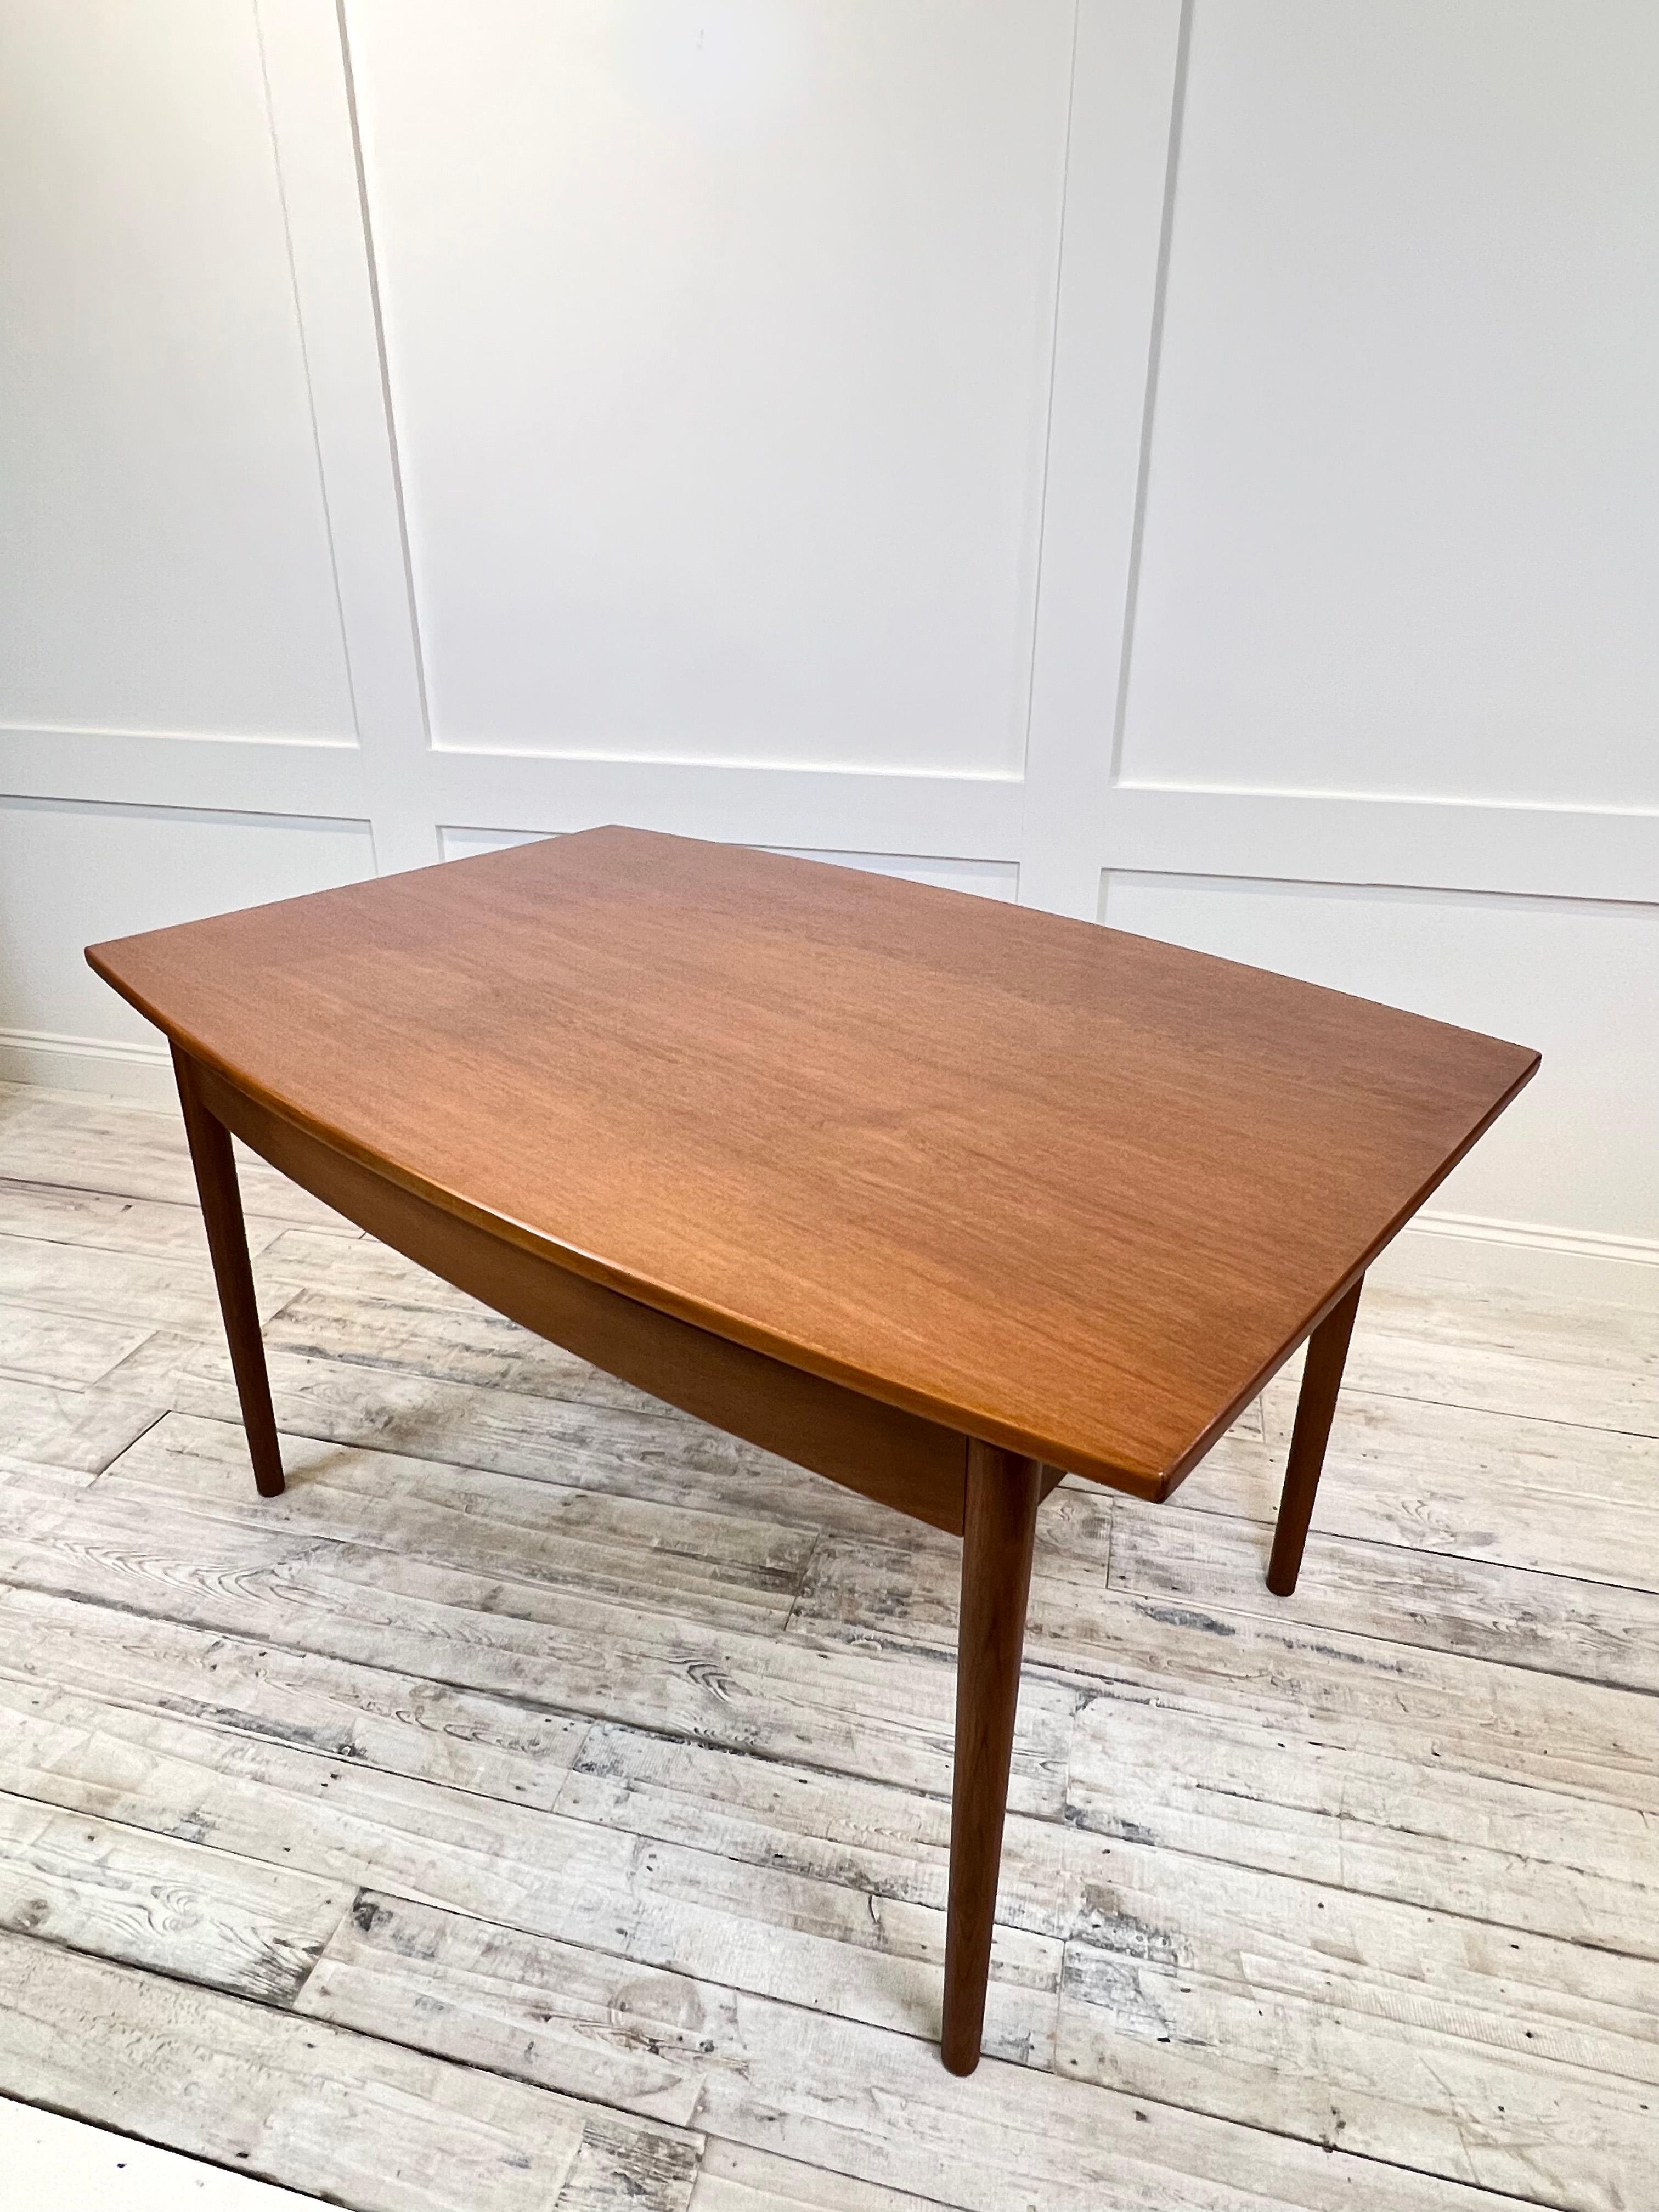 This vintage teak extendable dining table from G Plan UK, dating back to the 1960s, exudes timeless elegance and functionality. With its rich teak wood construction and sleek mid-century modern design, this table is a show-stopping centrepiece for